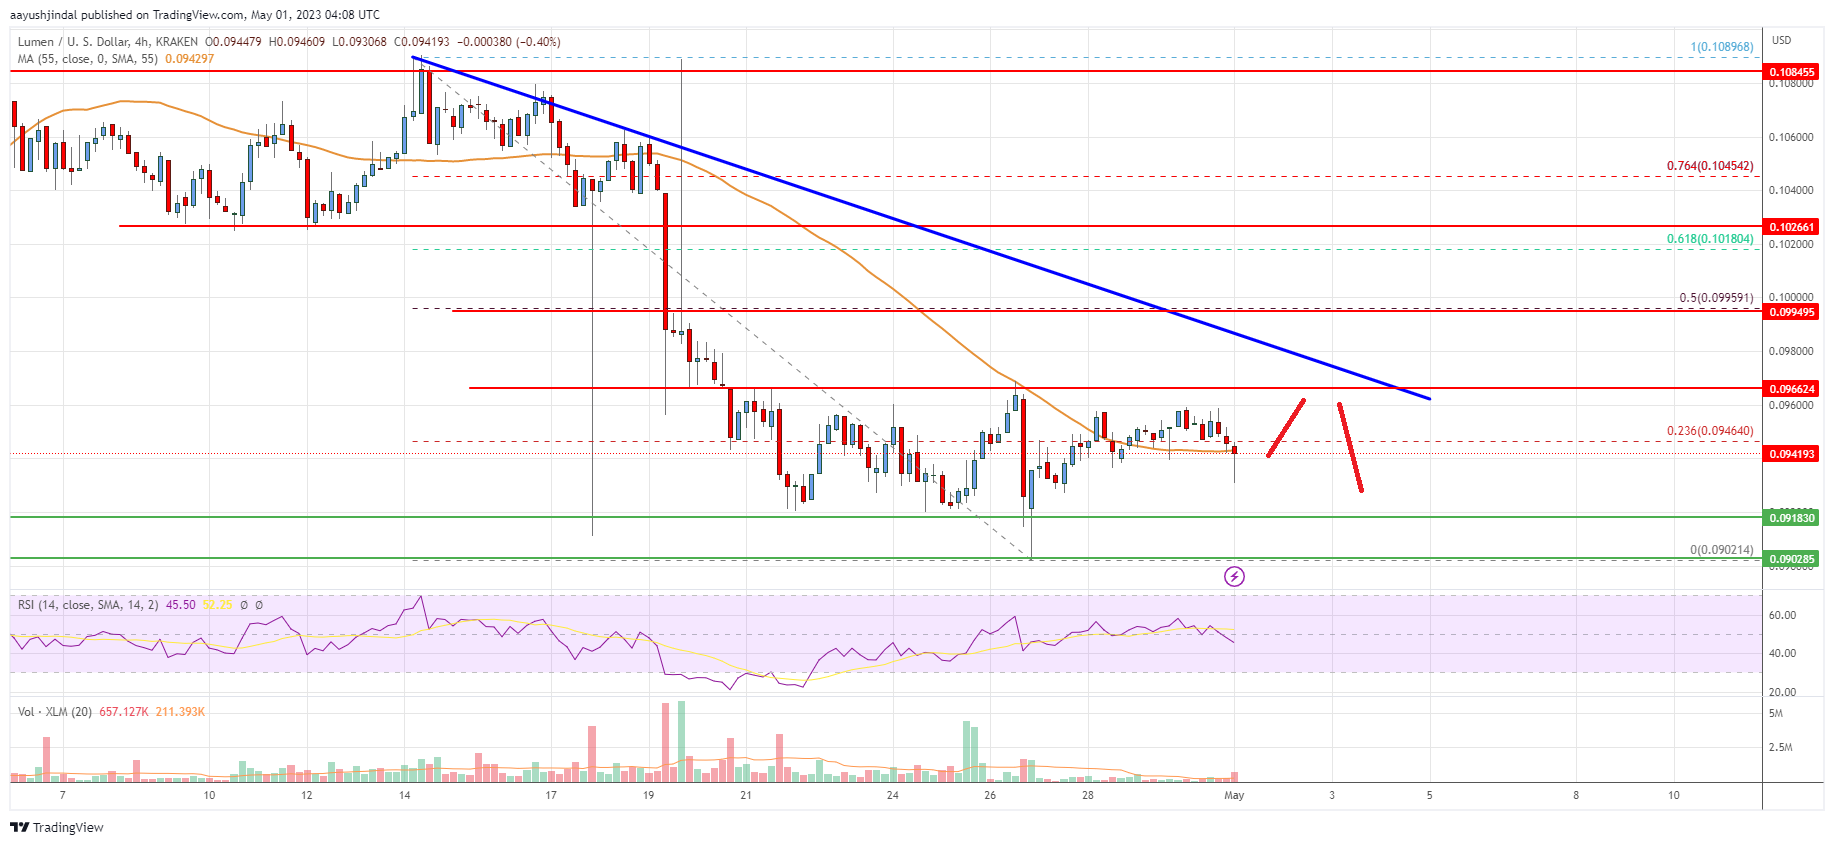 Stellar Lumen (XLM) Price Could Recover If It Clears $0.10